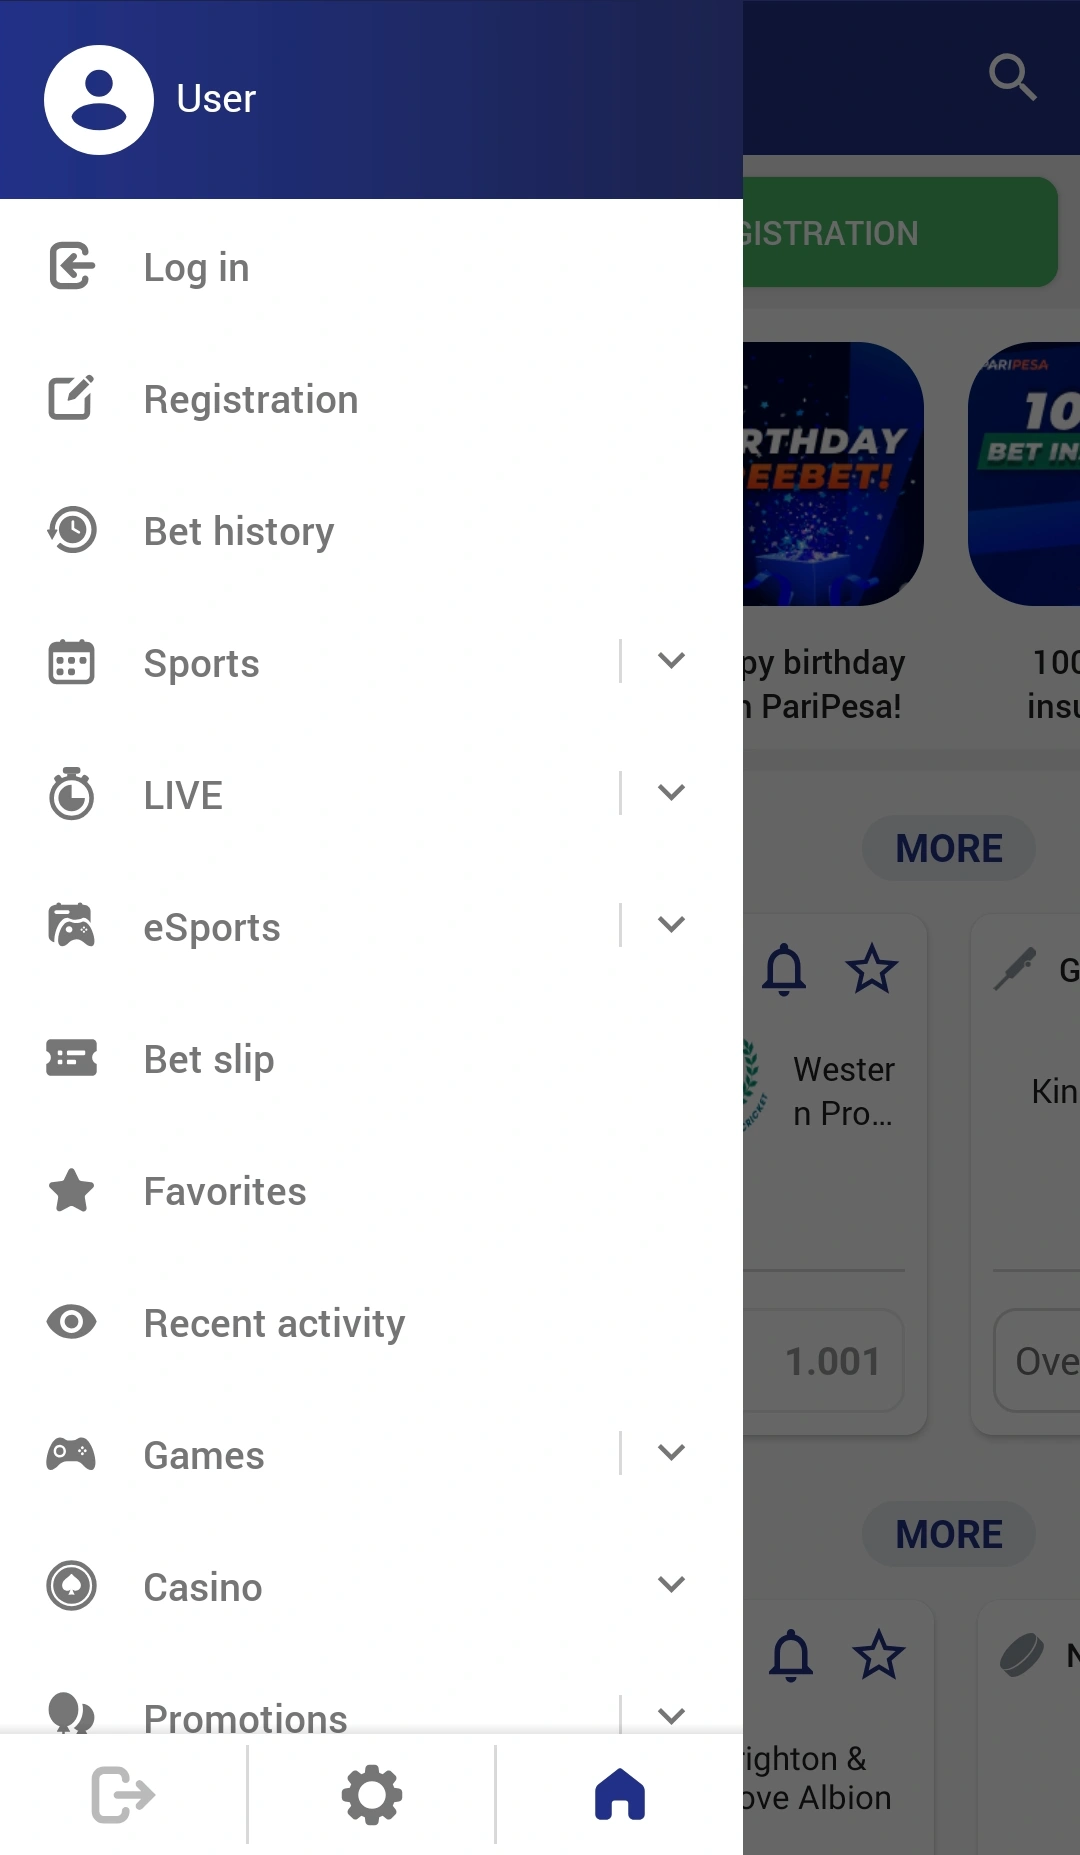 List of available sections in the app